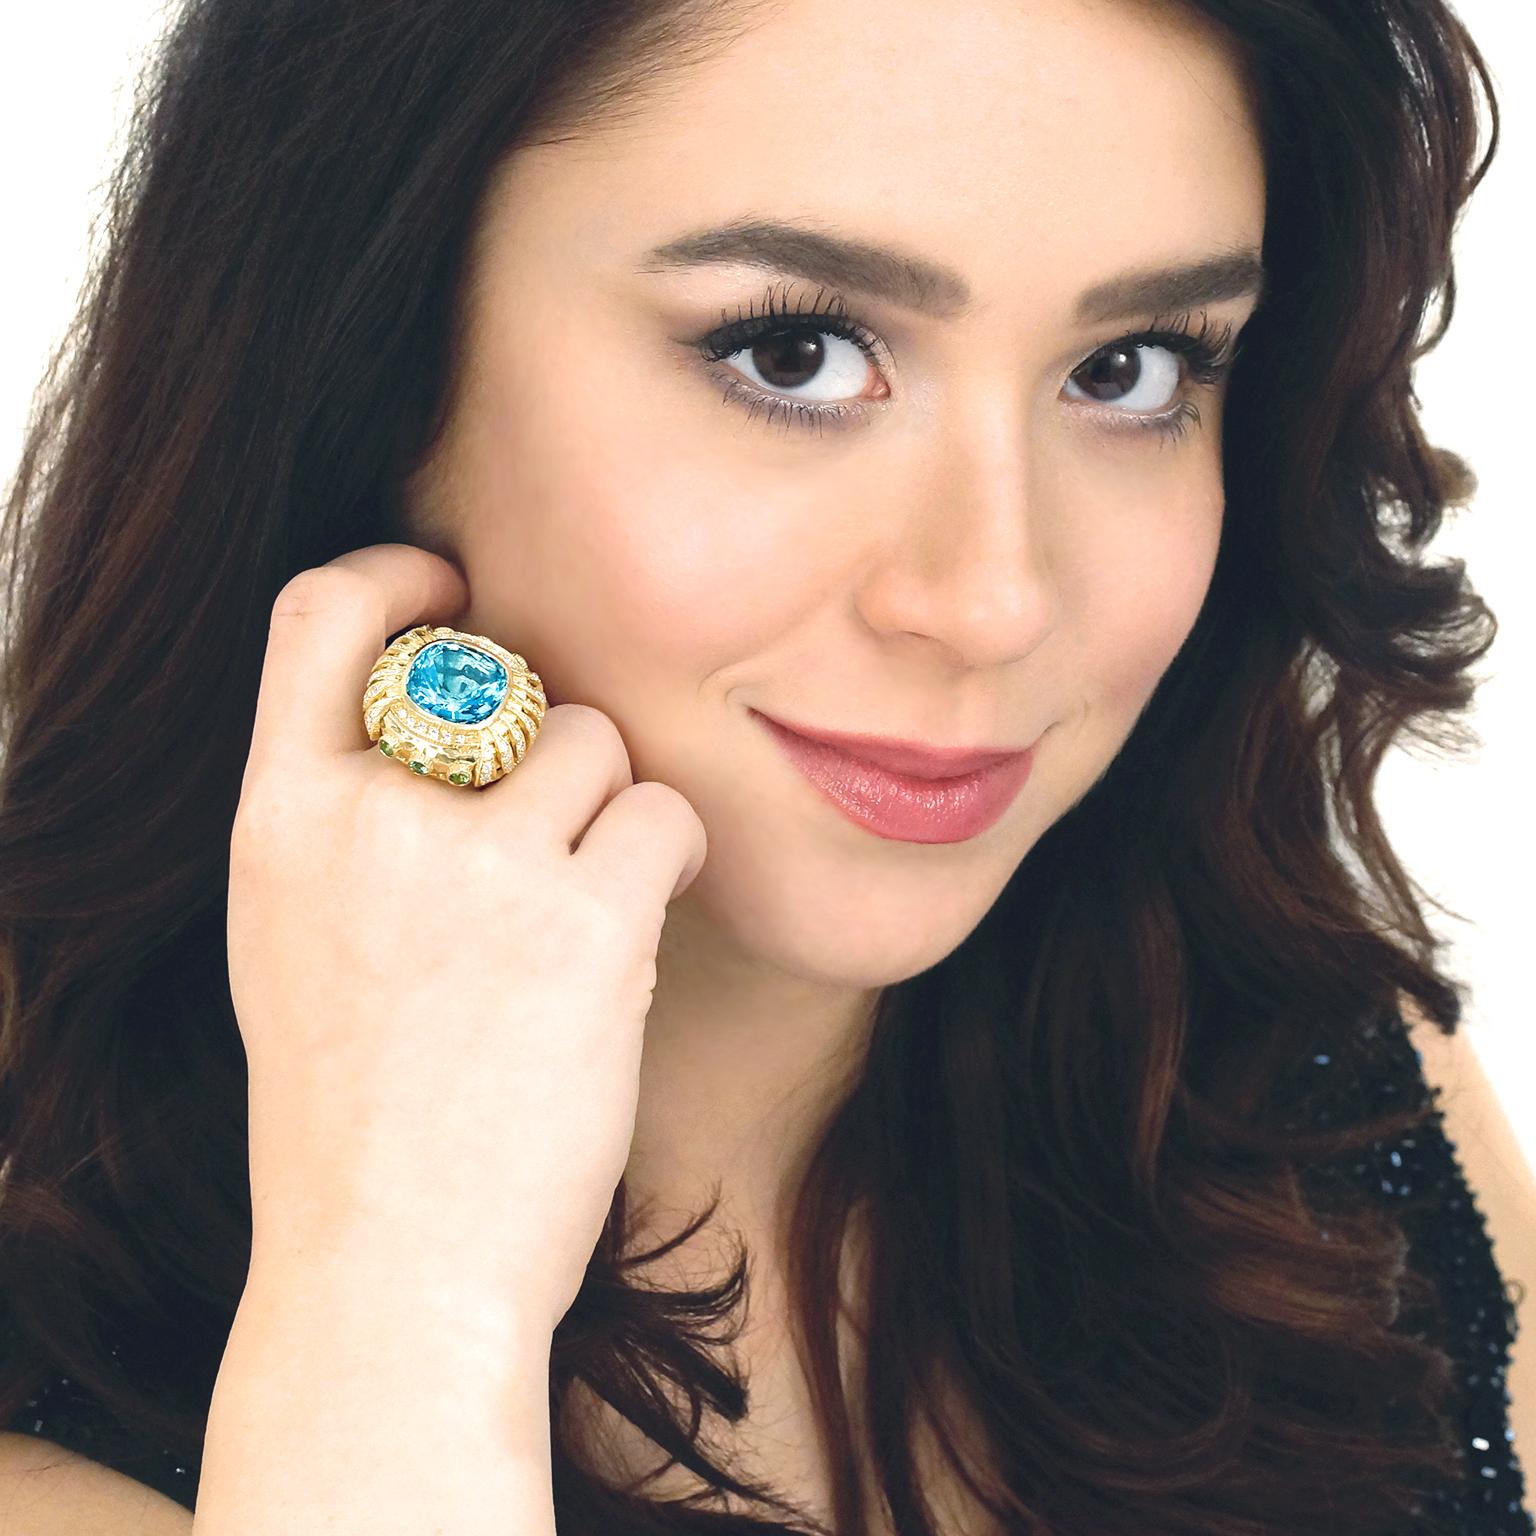 Circa 2006, 18k, American.  At the center of this organo-chic ring a magnificent 14 carat deep blue aquamarine splashes color on its elegantly surreal landscape. Its psychedelic look is underscored by a nuanced approach to hand-wrought detail such